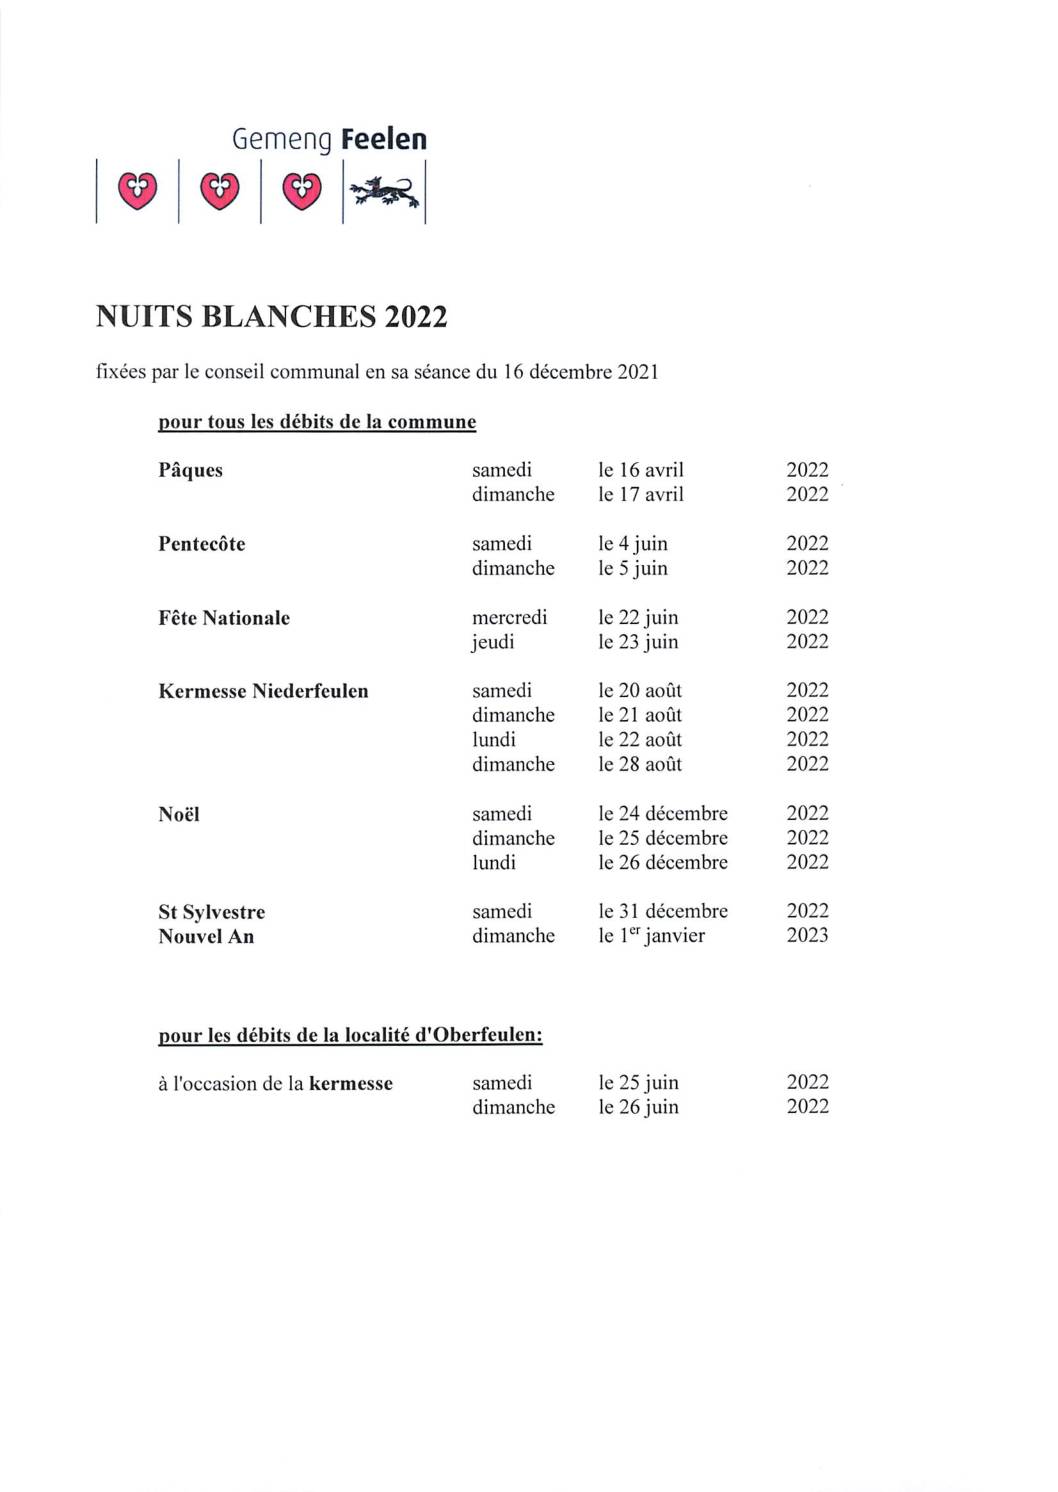 Nuits blanches 2022